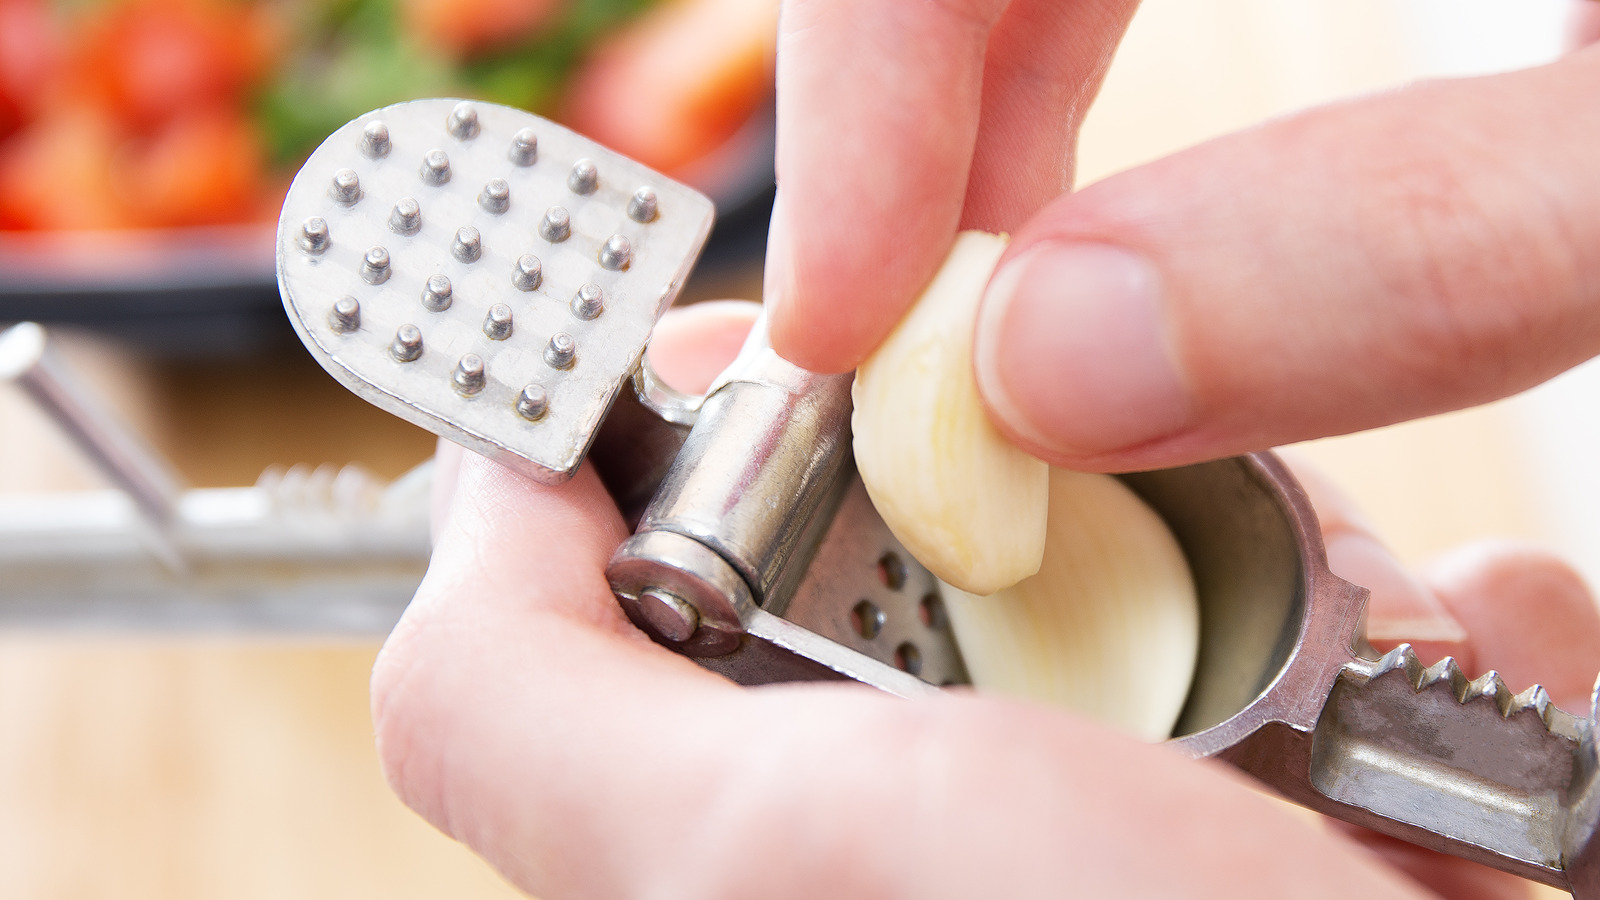 Is the garlic press a devilish invention?, Food